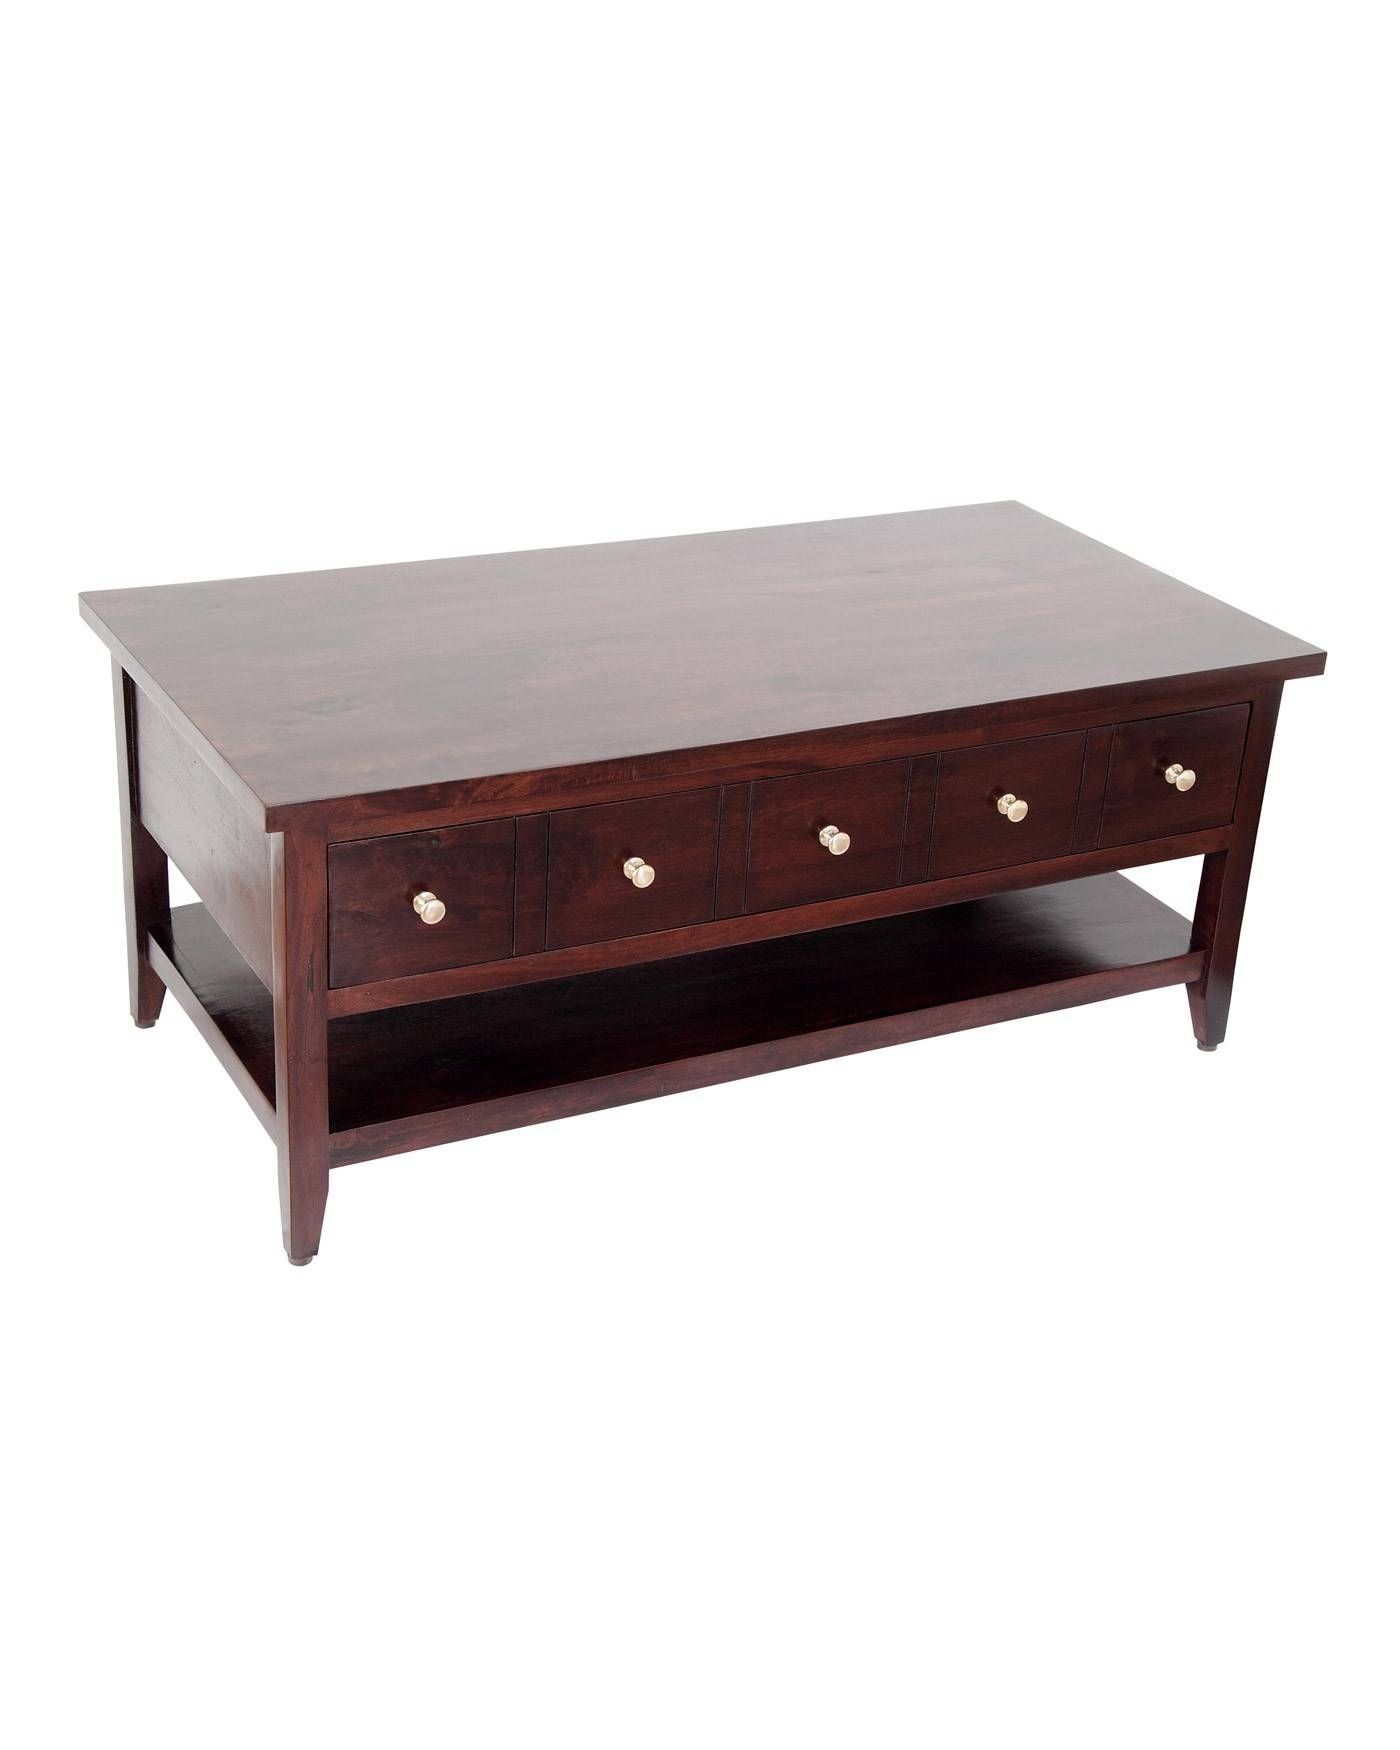 Groove Solid Mango Wood Coffee Table With Drawers  Dark Shade With Dark Wood Coffee Tables (View 3 of 15)